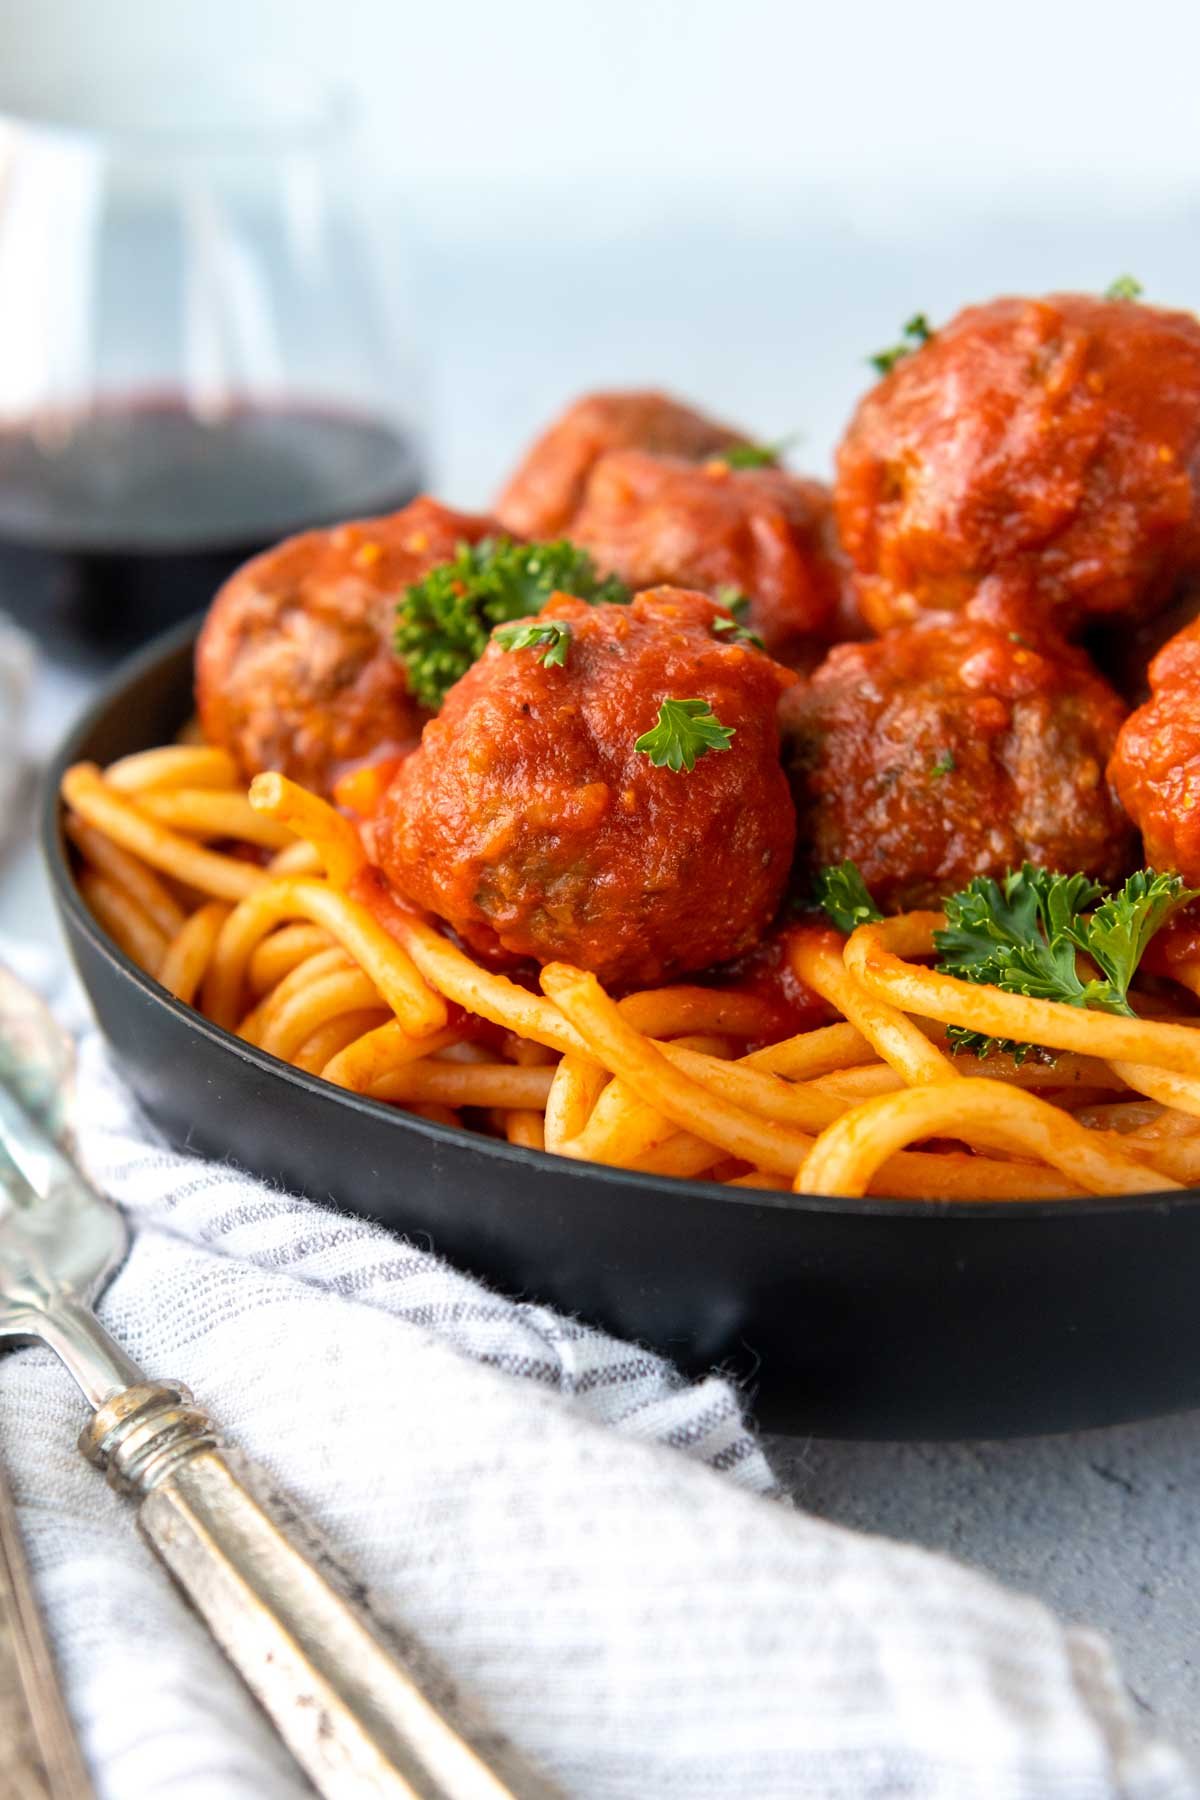 meatballs served over pasta in a black bowl.